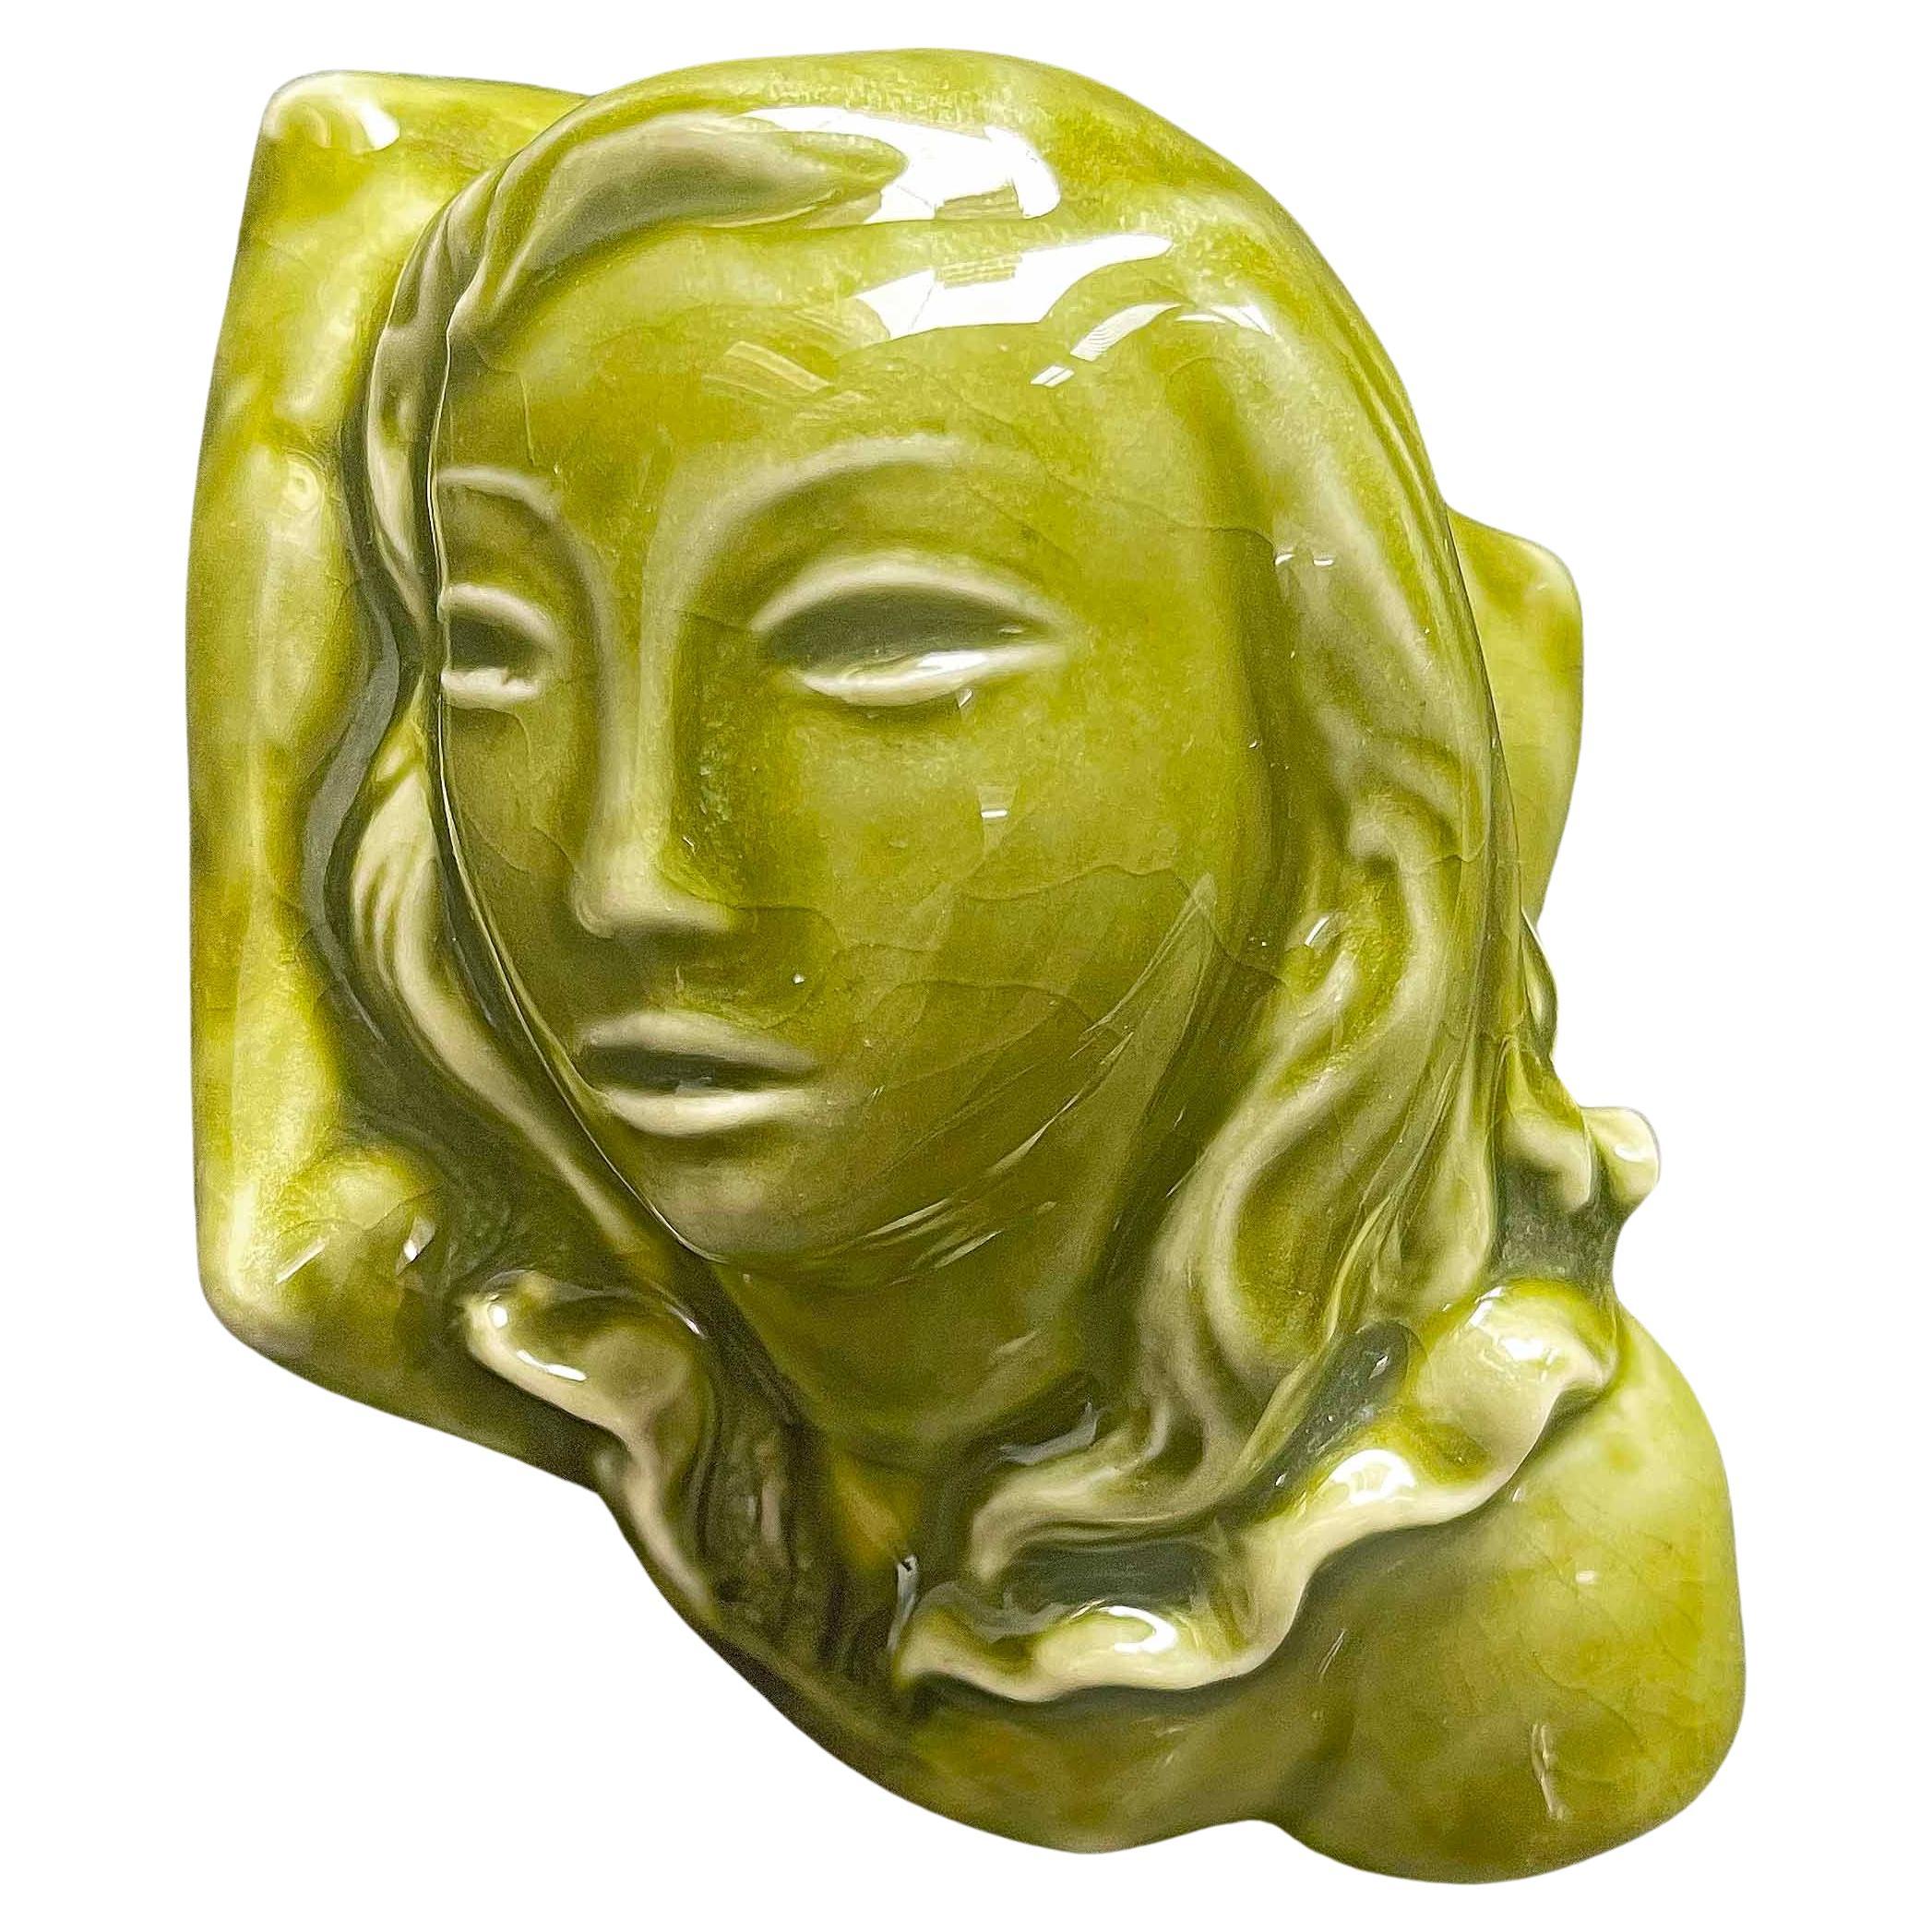 "Suzanne", Art Deco Paperweight in Green Glaze by David Seyler for Kenton Hills For Sale